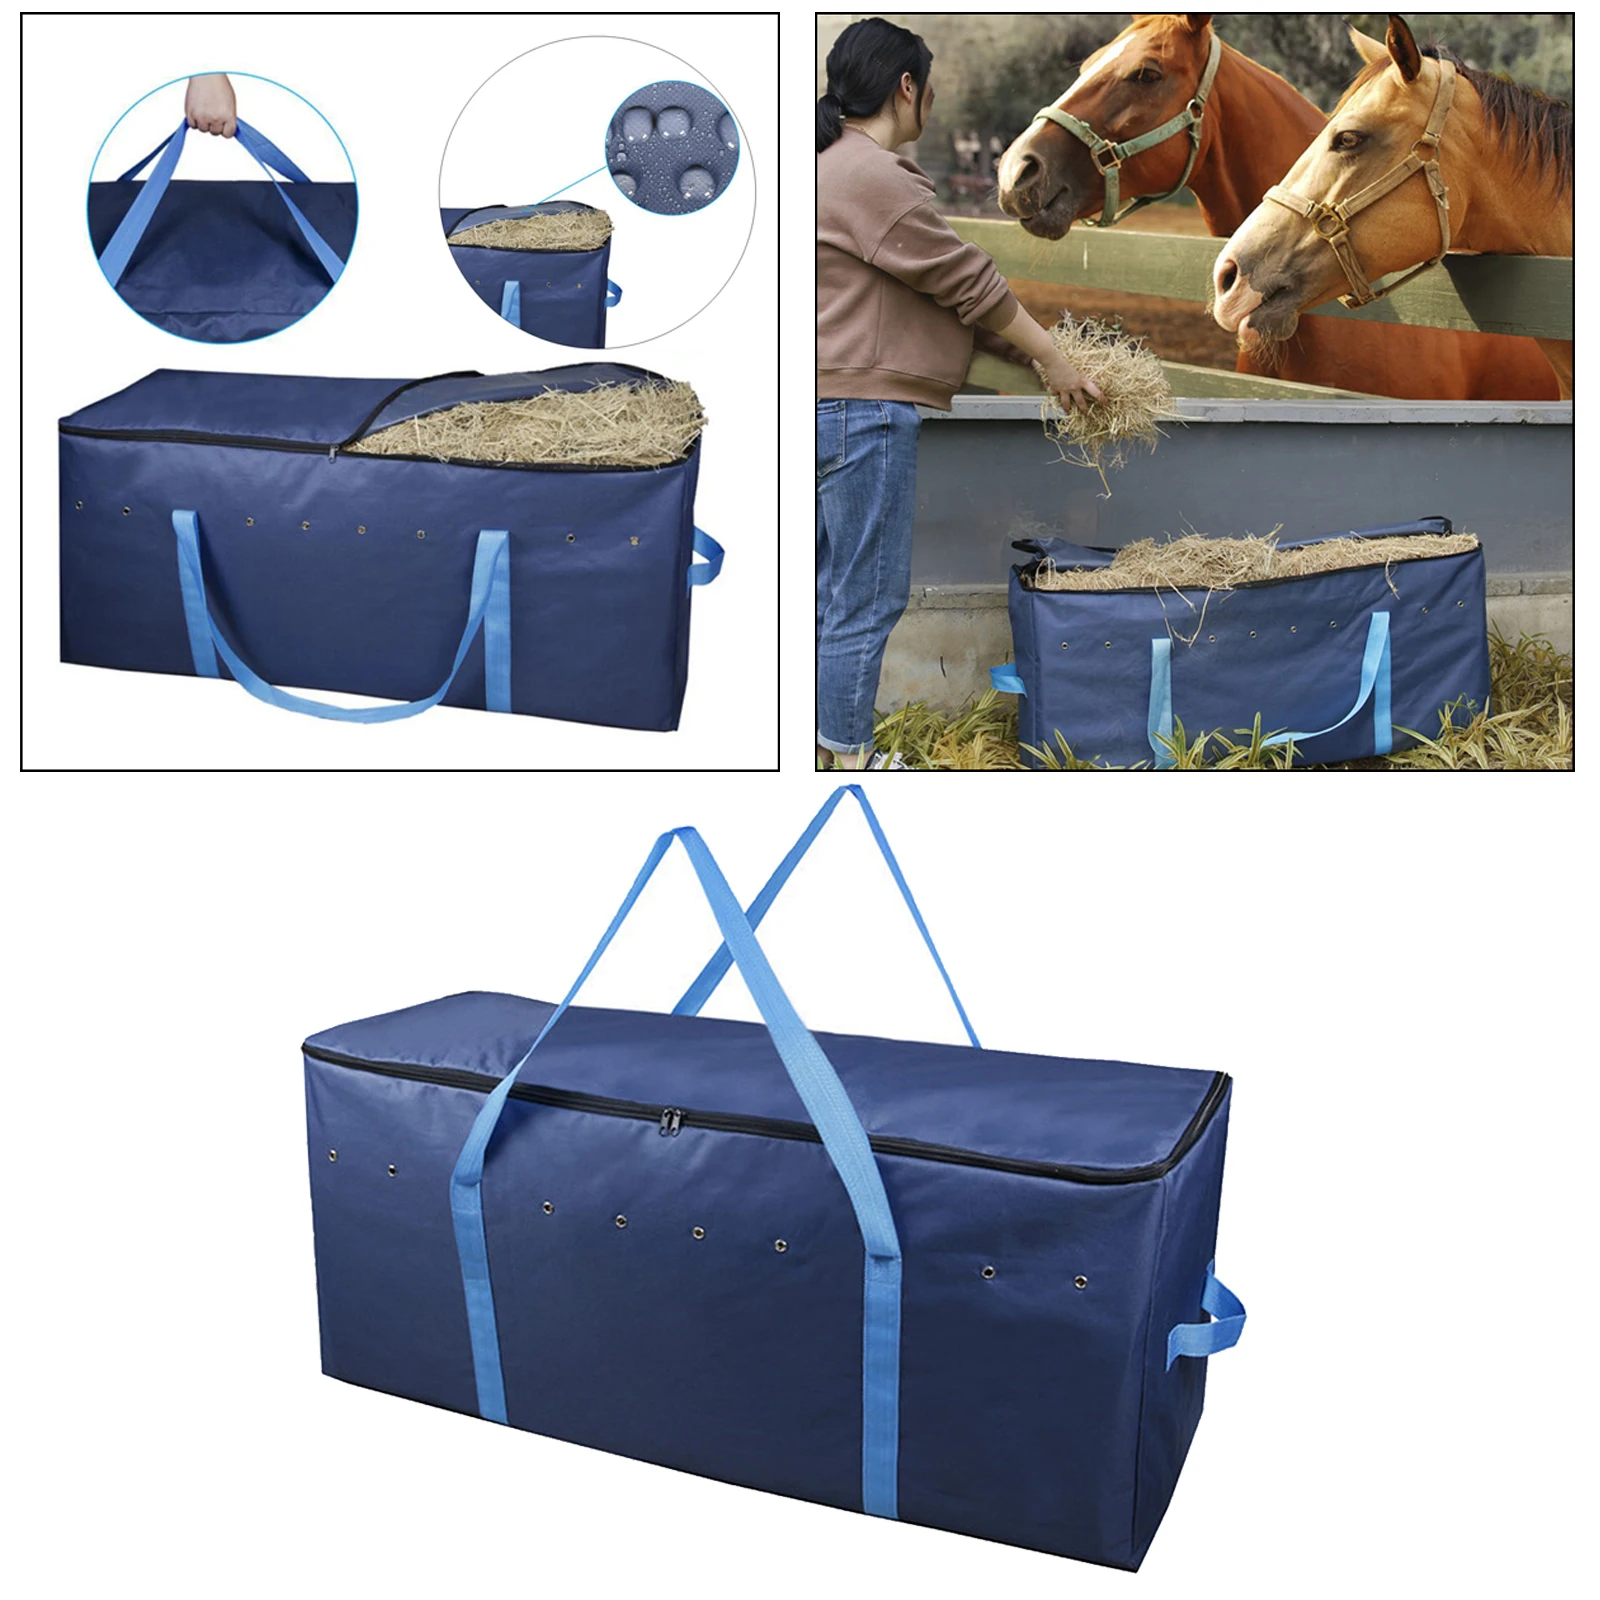 Folding Large Heavy Duty Hay Bale Carrying Bag Horse with Zipper Tote Oxford